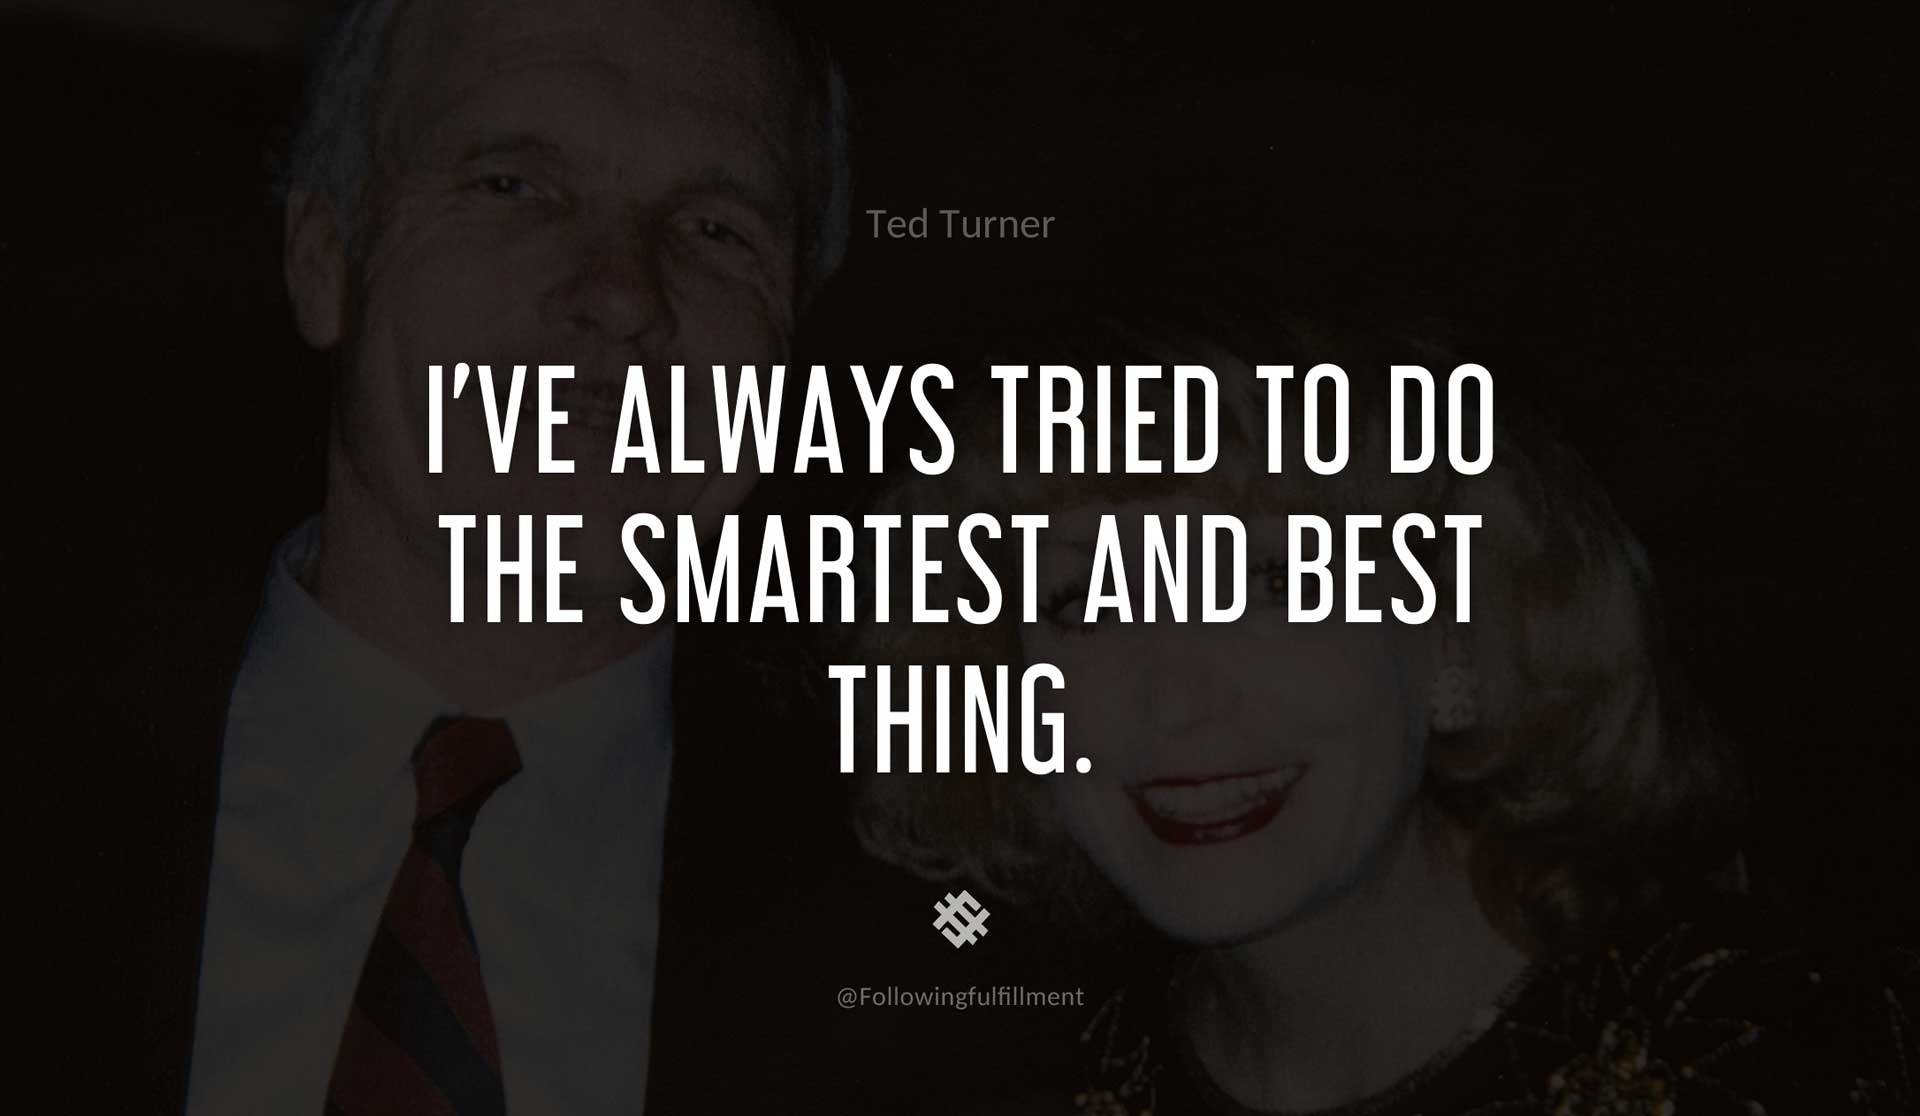 I've-always-tried-to-do-the-smartest-and-best-thing.-TED-TURNER-Quote.jpg